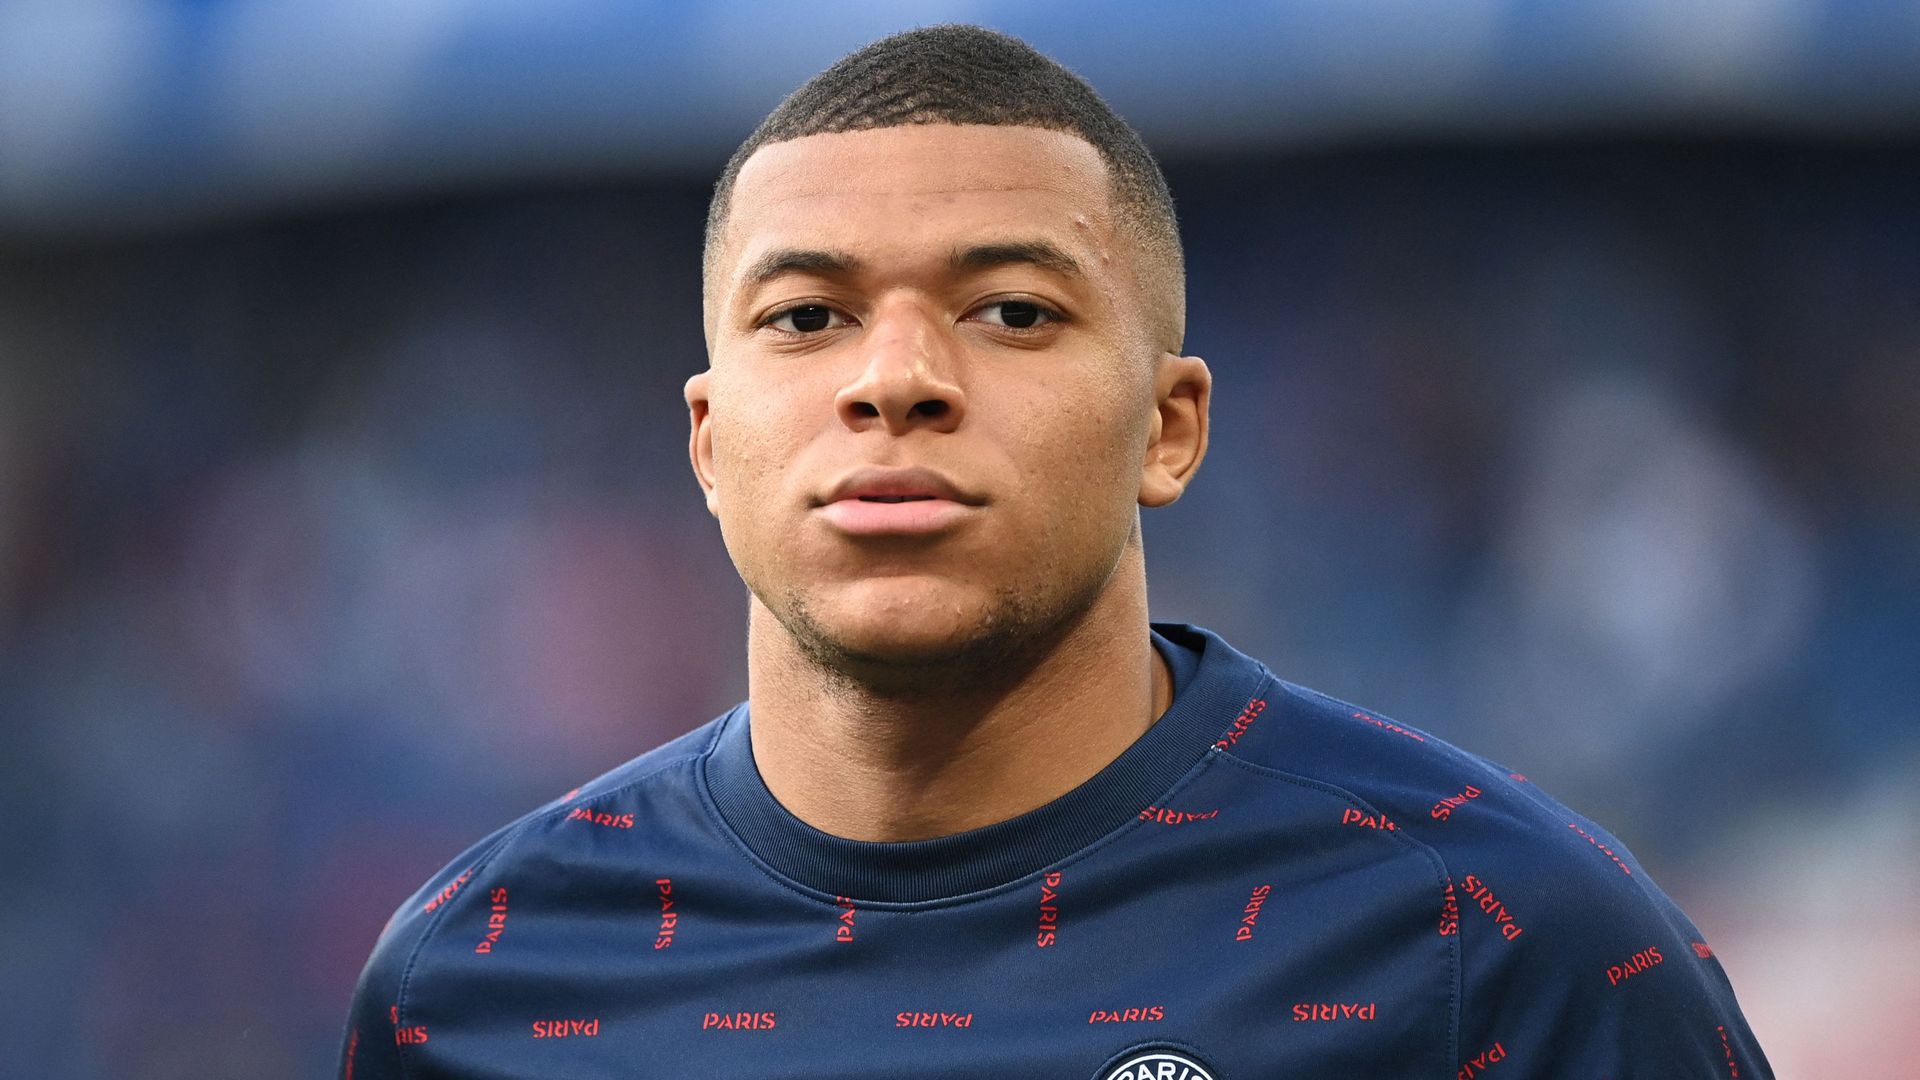 Real Madrid's offer was similar to PSG's' chief Ceferin hits back at Mbappe deal criticism. Goal.com US